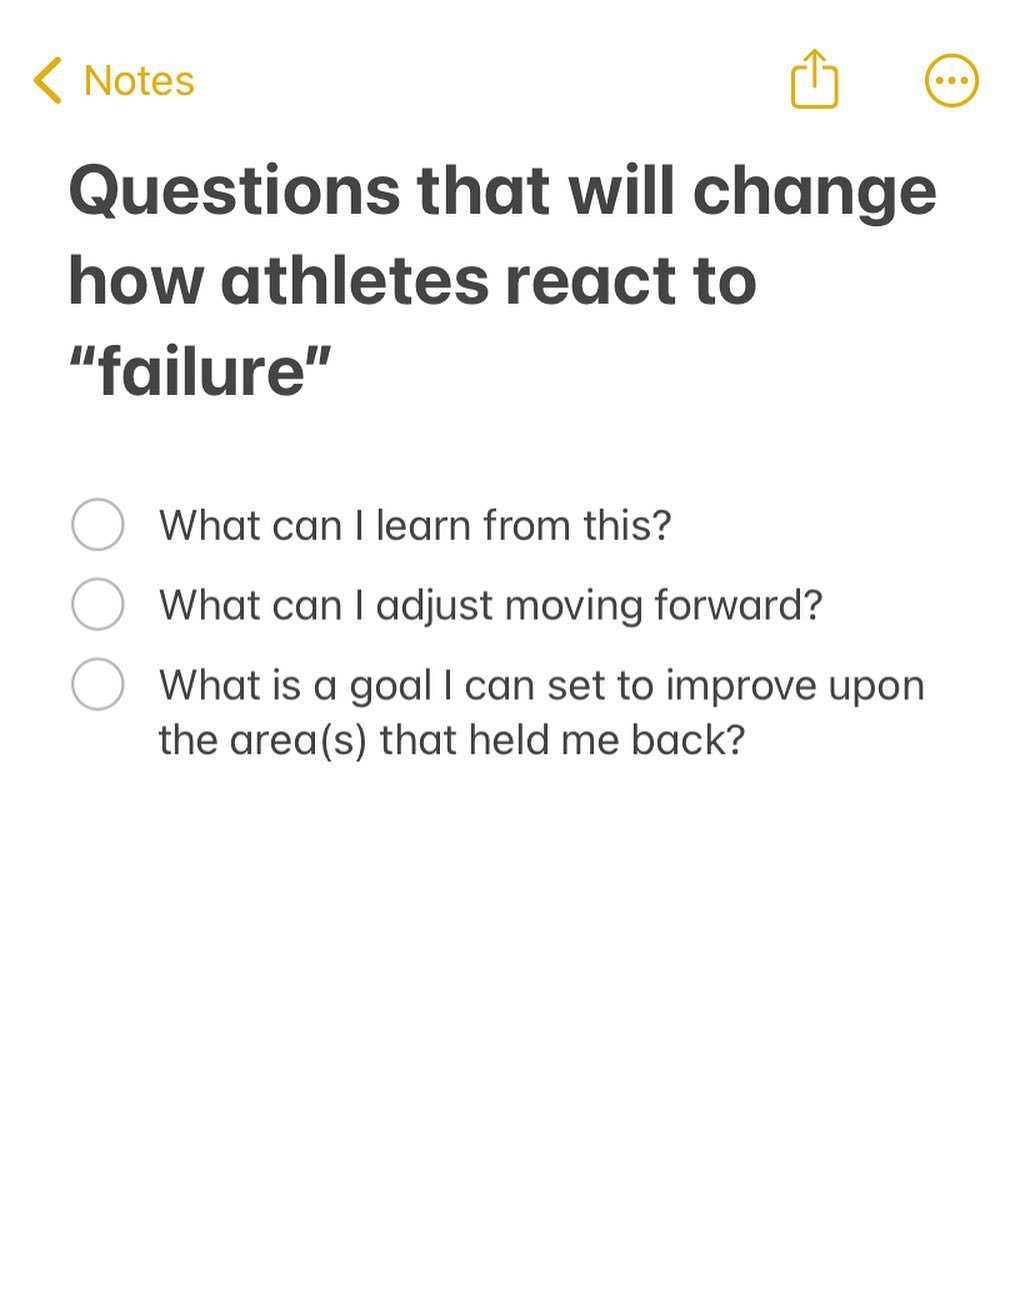 [SAVE THIS] Something I am always trying to emphasize with the athletes I work with is that when you&rsquo;re losing your learning.

It&rsquo;s not the end of the world. 

It&rsquo;s a time for you to evaluate and elevate your game. 

I recently had 